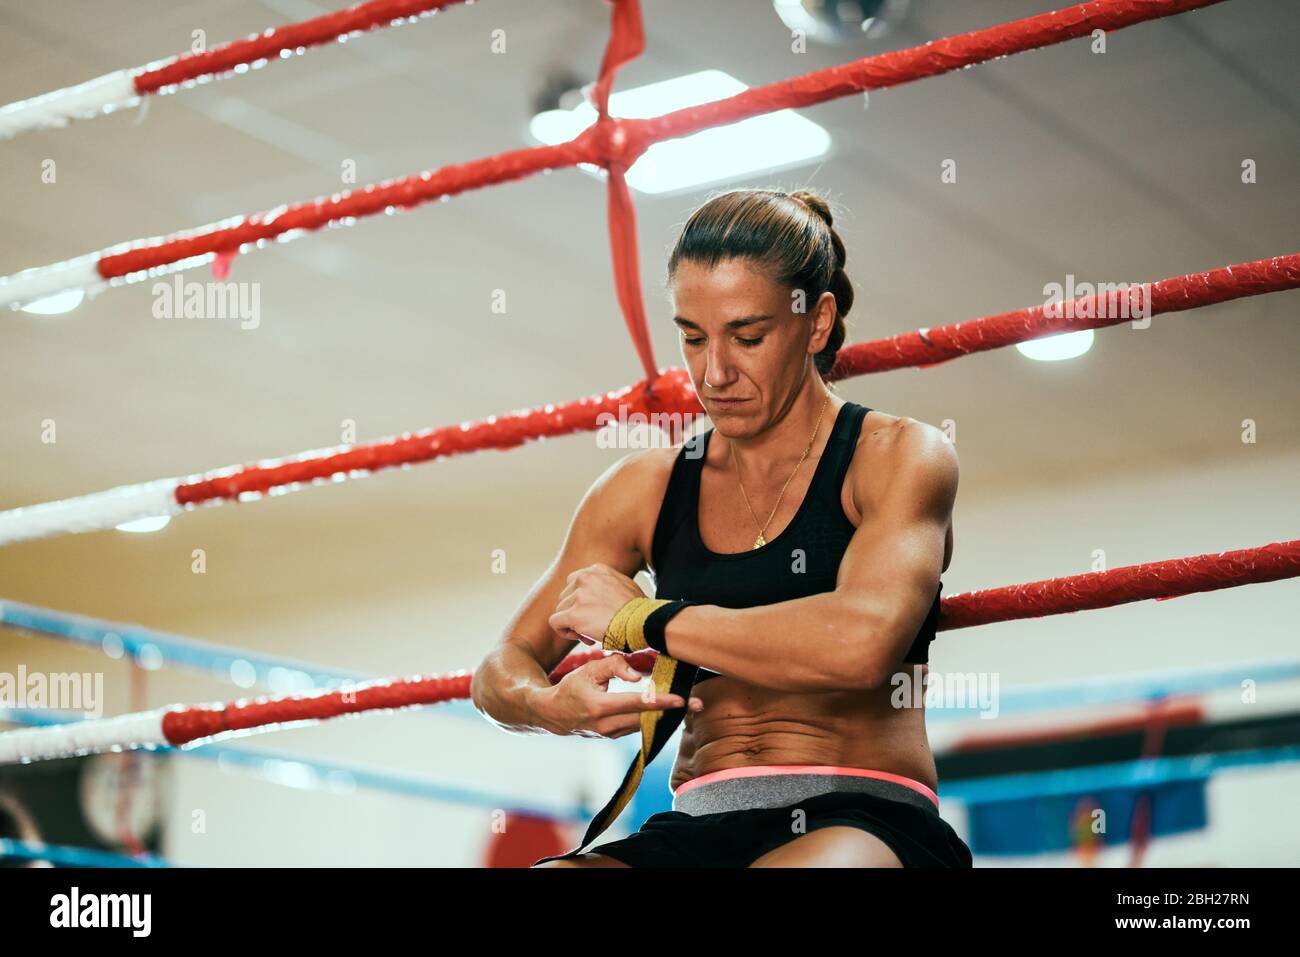 Woman tying bandage around her hand in boxing ring Stock Photo